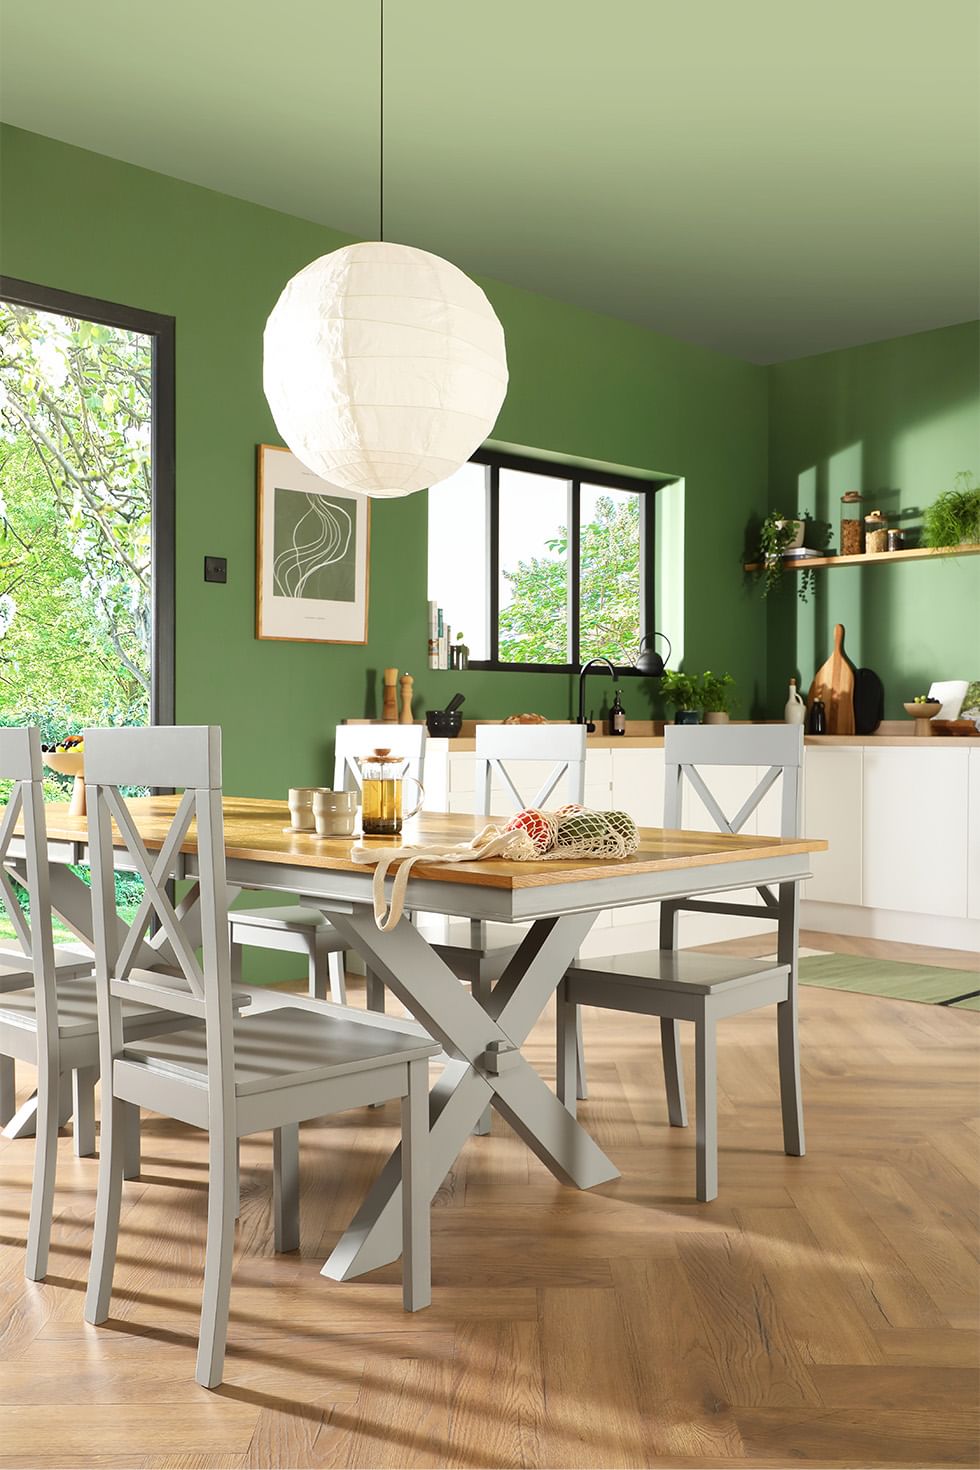 Two tone grey and oak dining set in a modern yet natural dining area